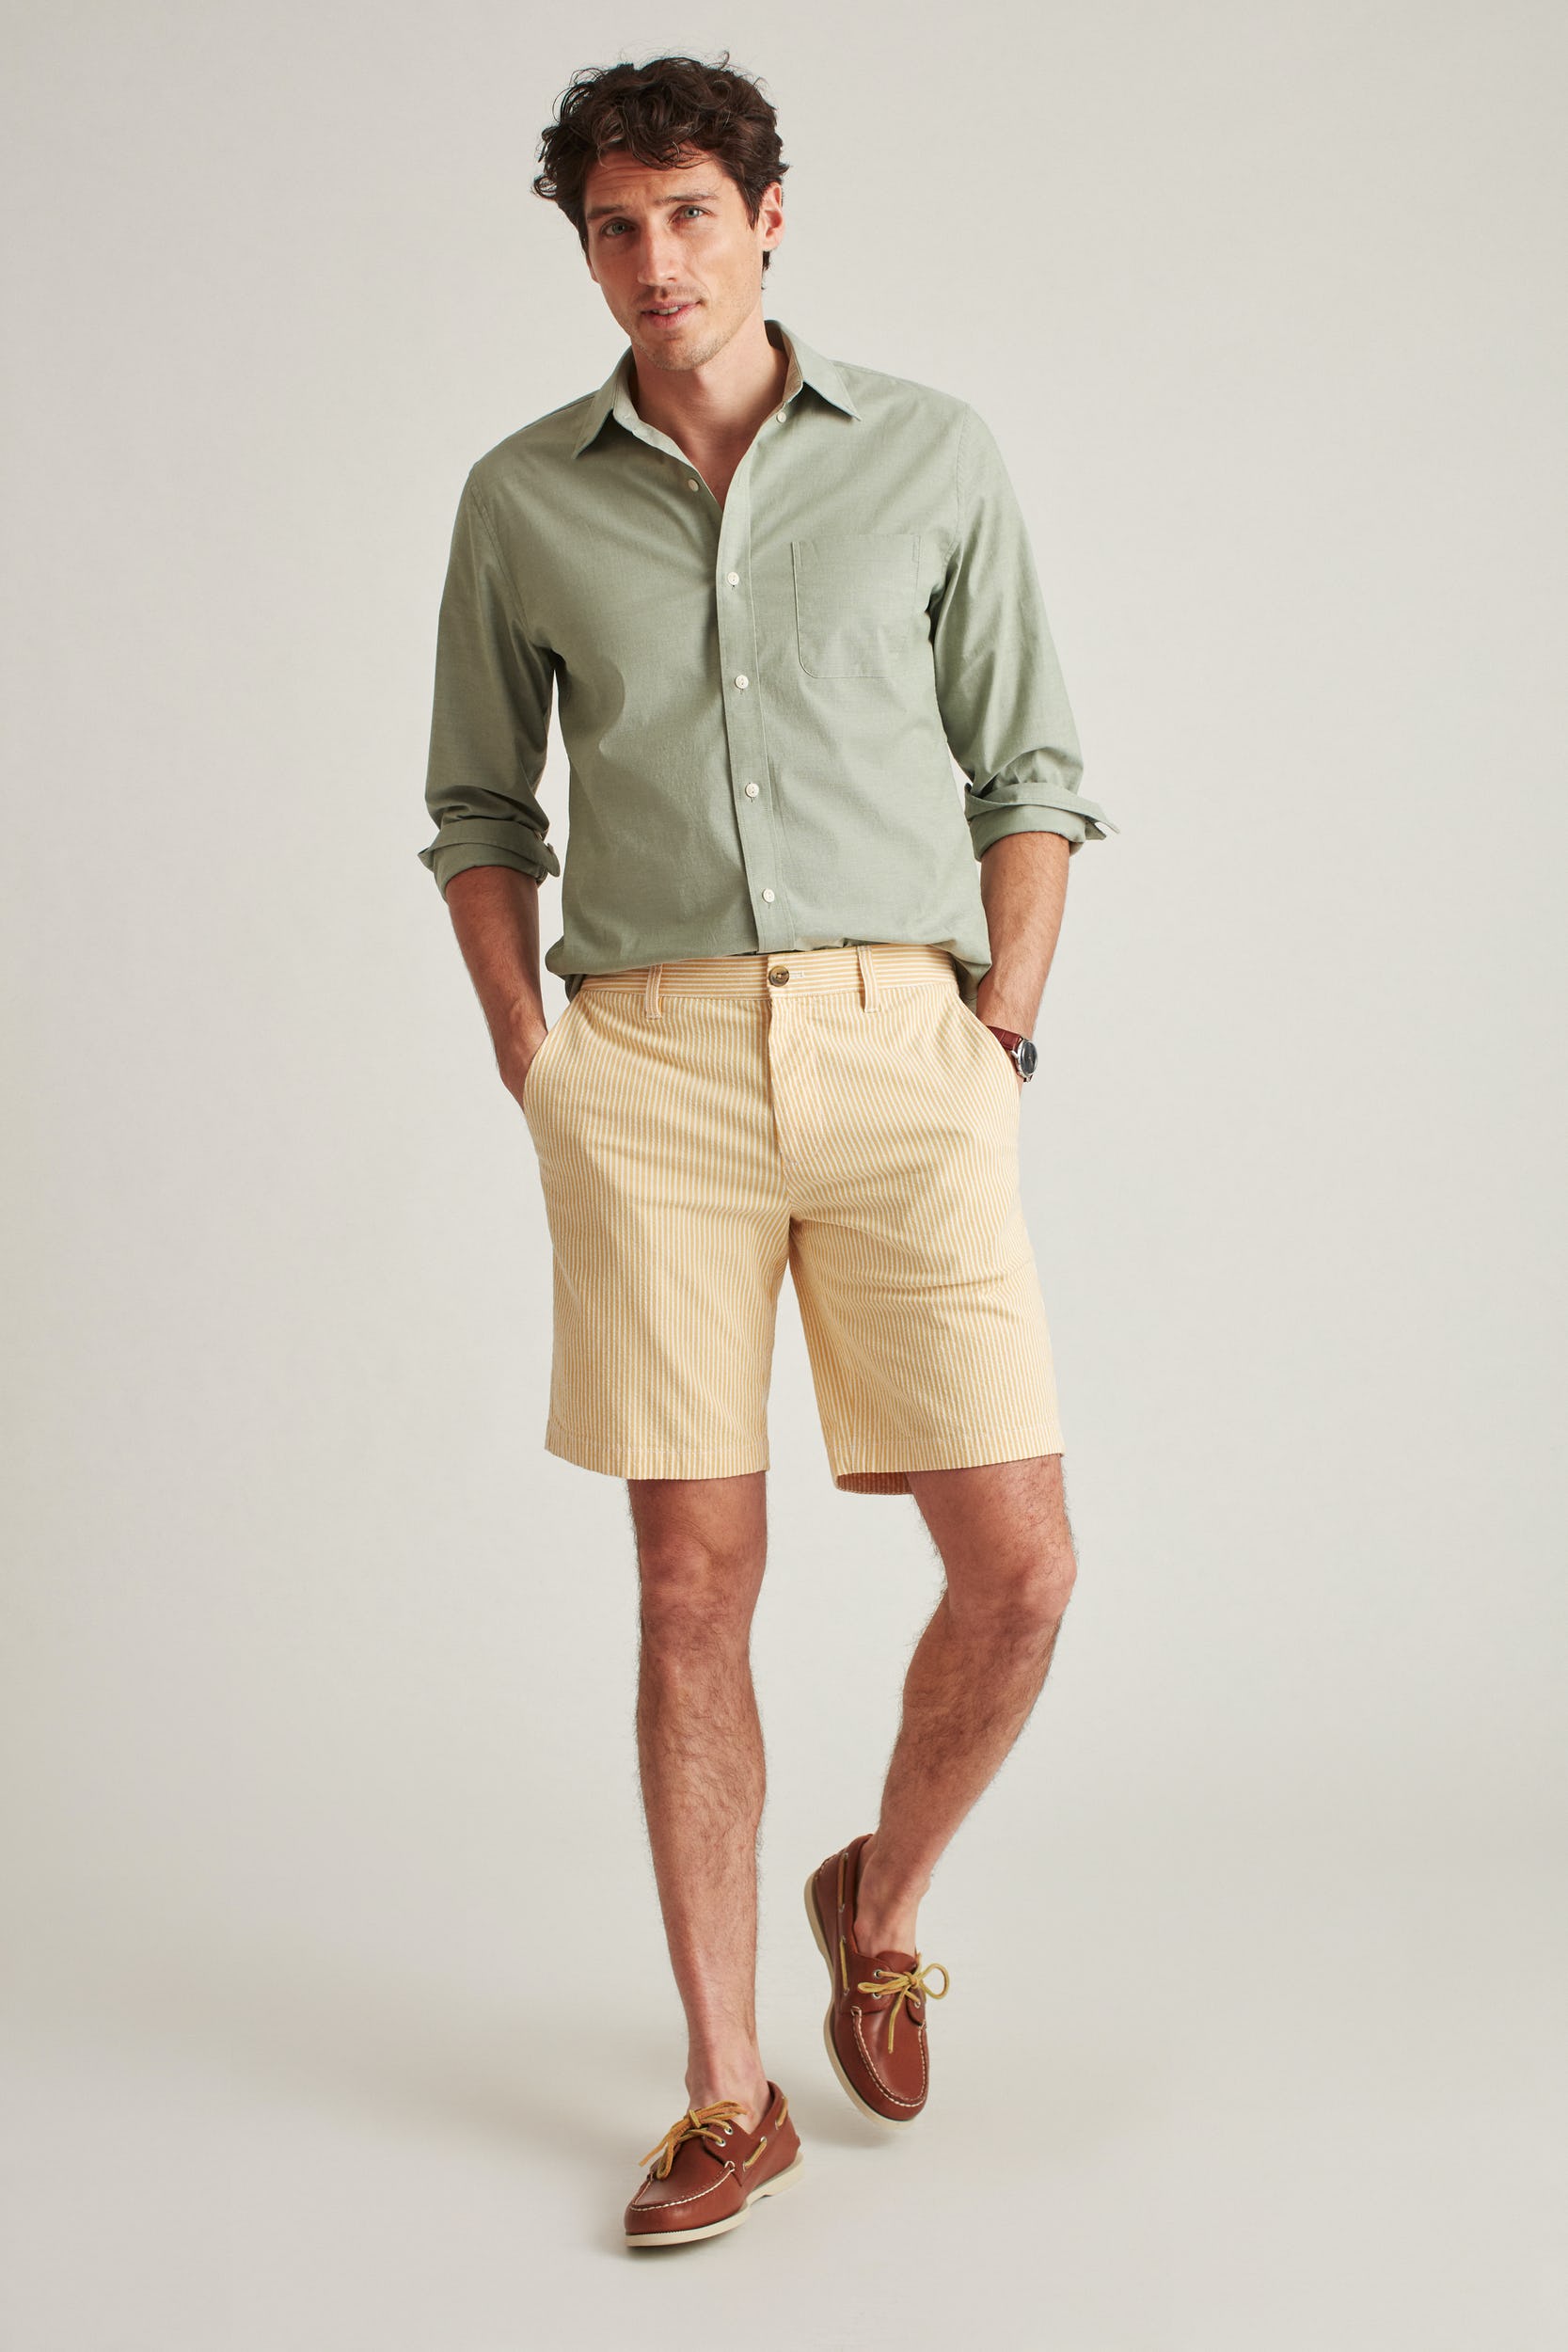 The Best Mens’ Shorts For Big Thighs | Shopping Tips For Men